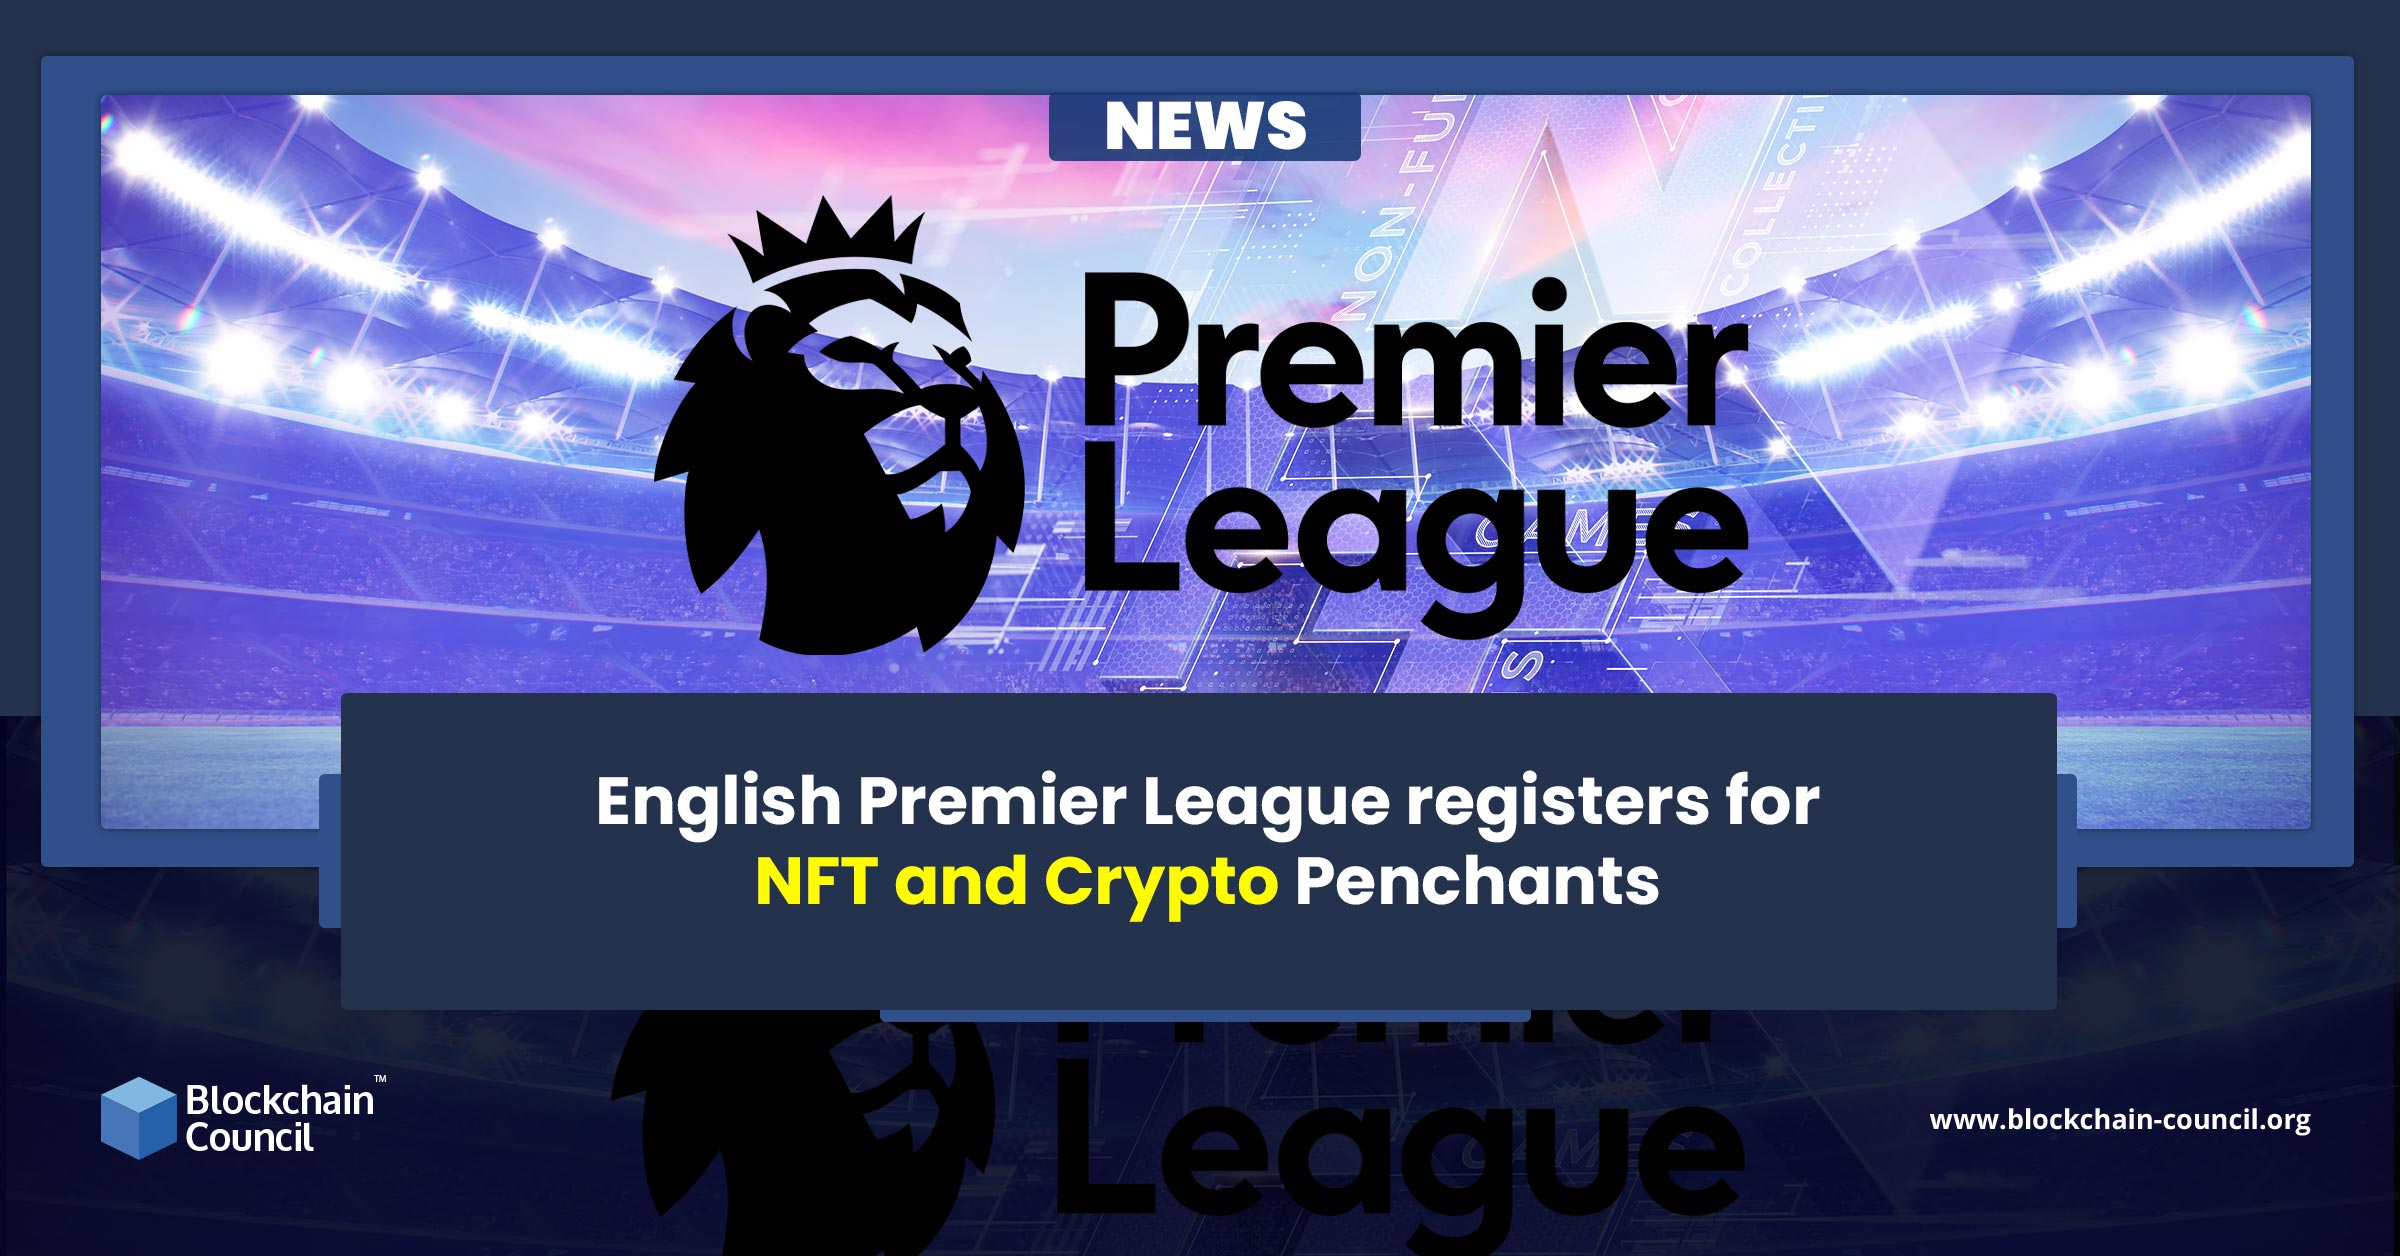 English Premier League registers for NFT and Crypto Penchants